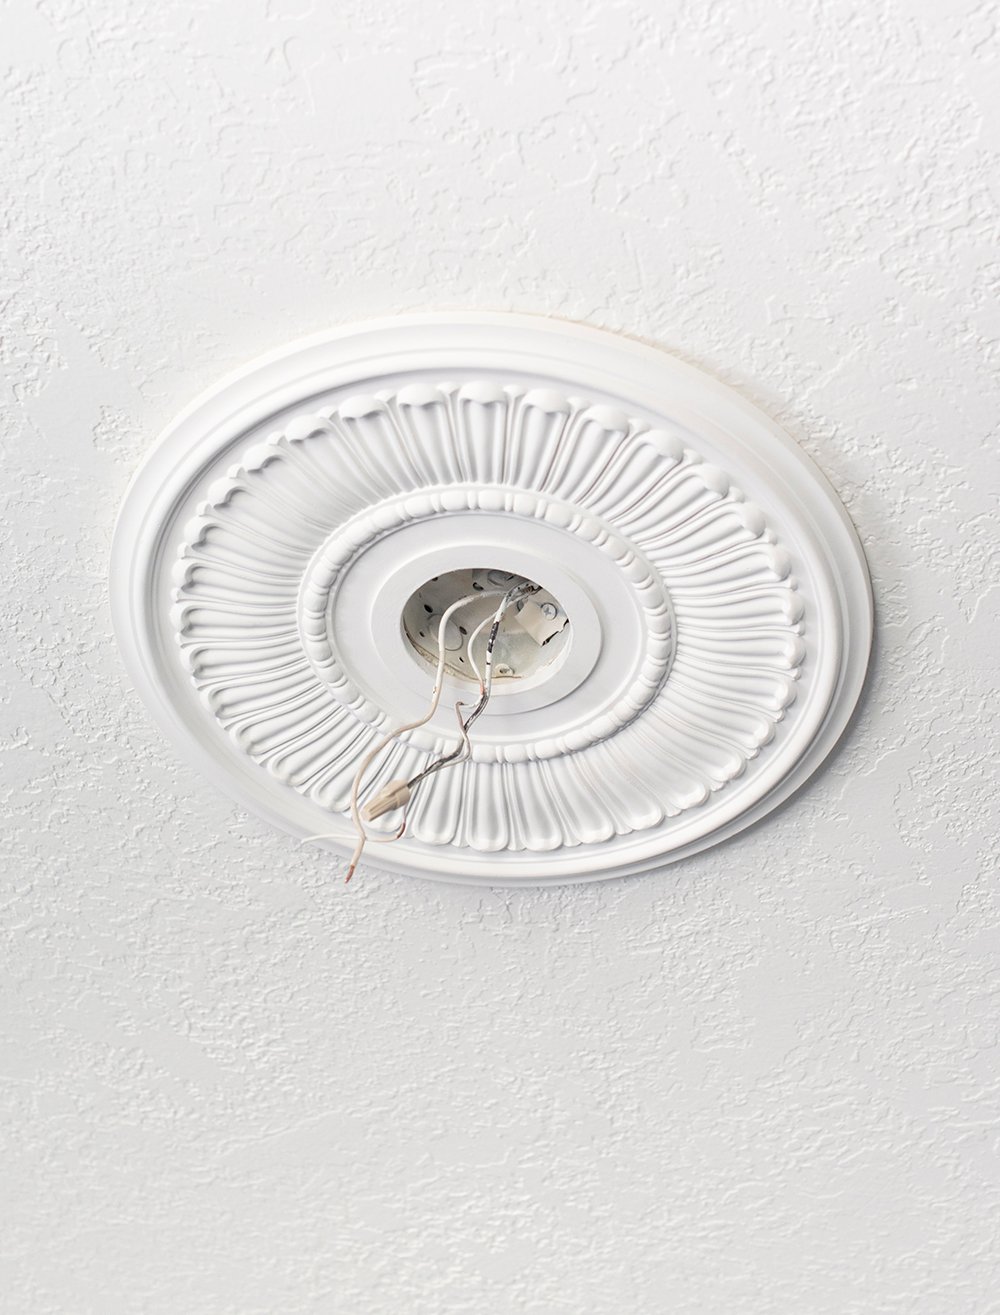 How to Install a Ceiling Medallion - roomfortuesday.com